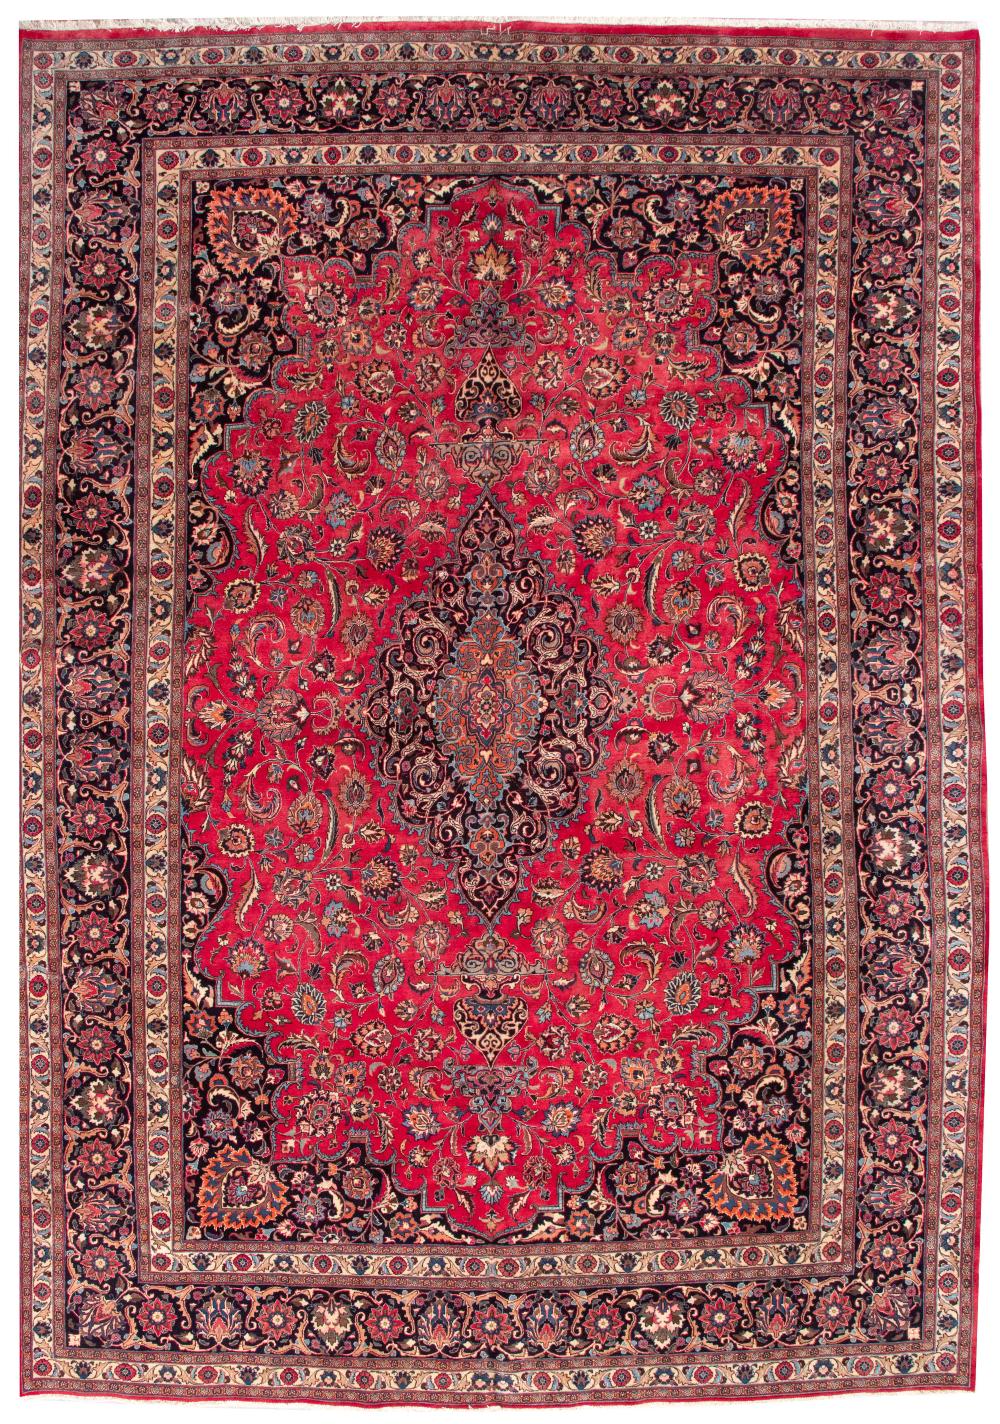 MESHED RUG 11 3 X 16 4  34d6ad